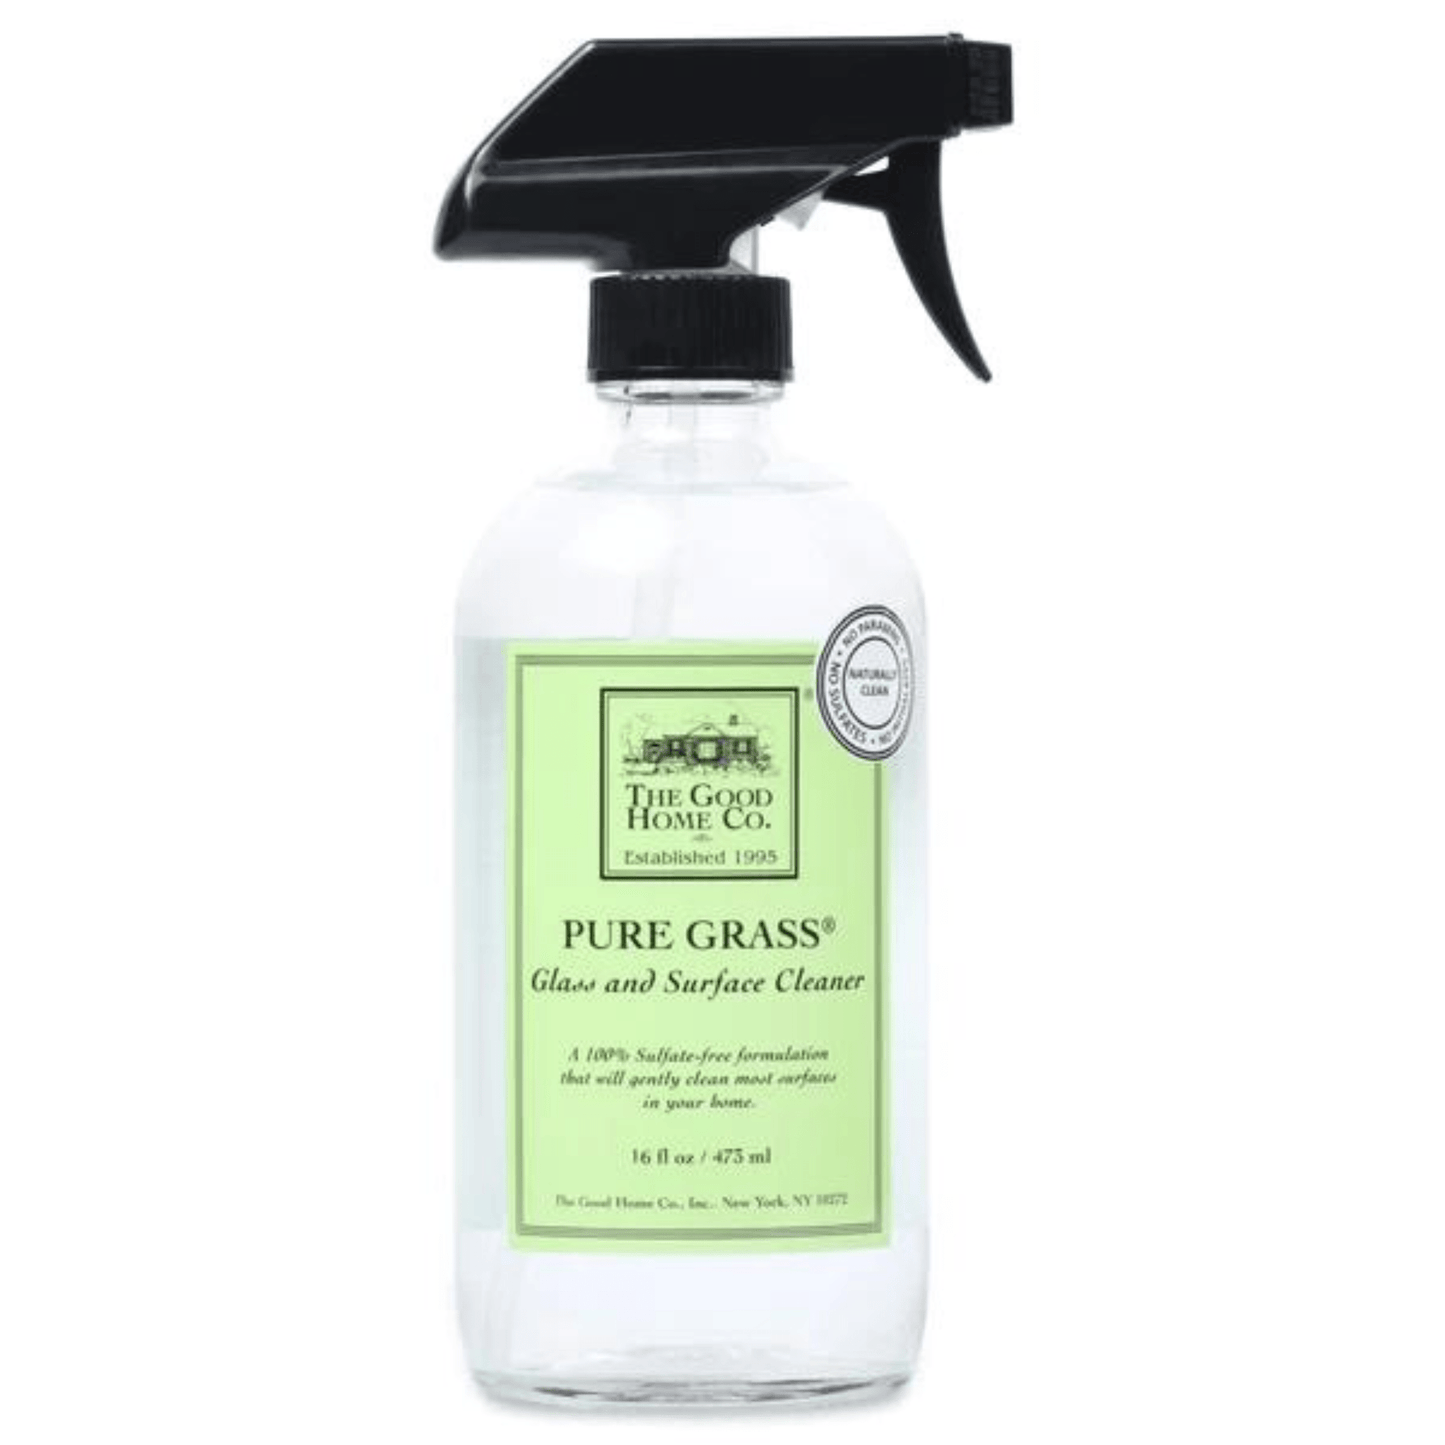 Primary Image of Pure Grass Surface Cleaner Spray